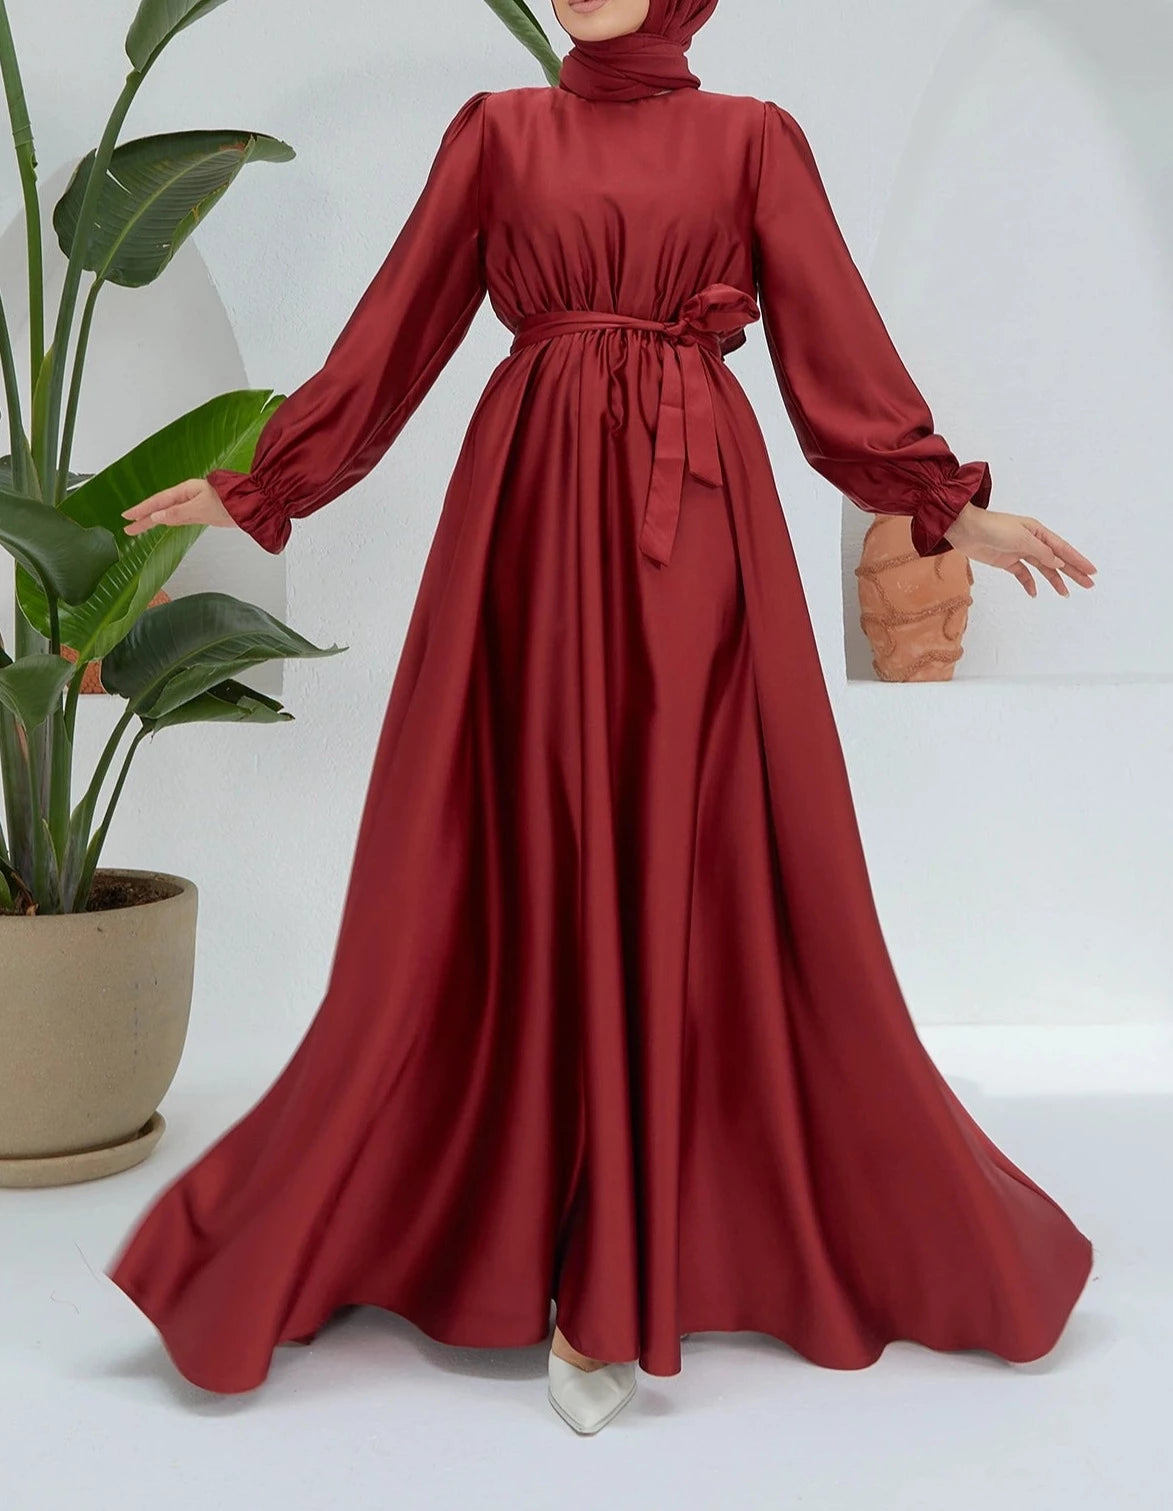 Belted satin evening dress - Try Modest Limited 